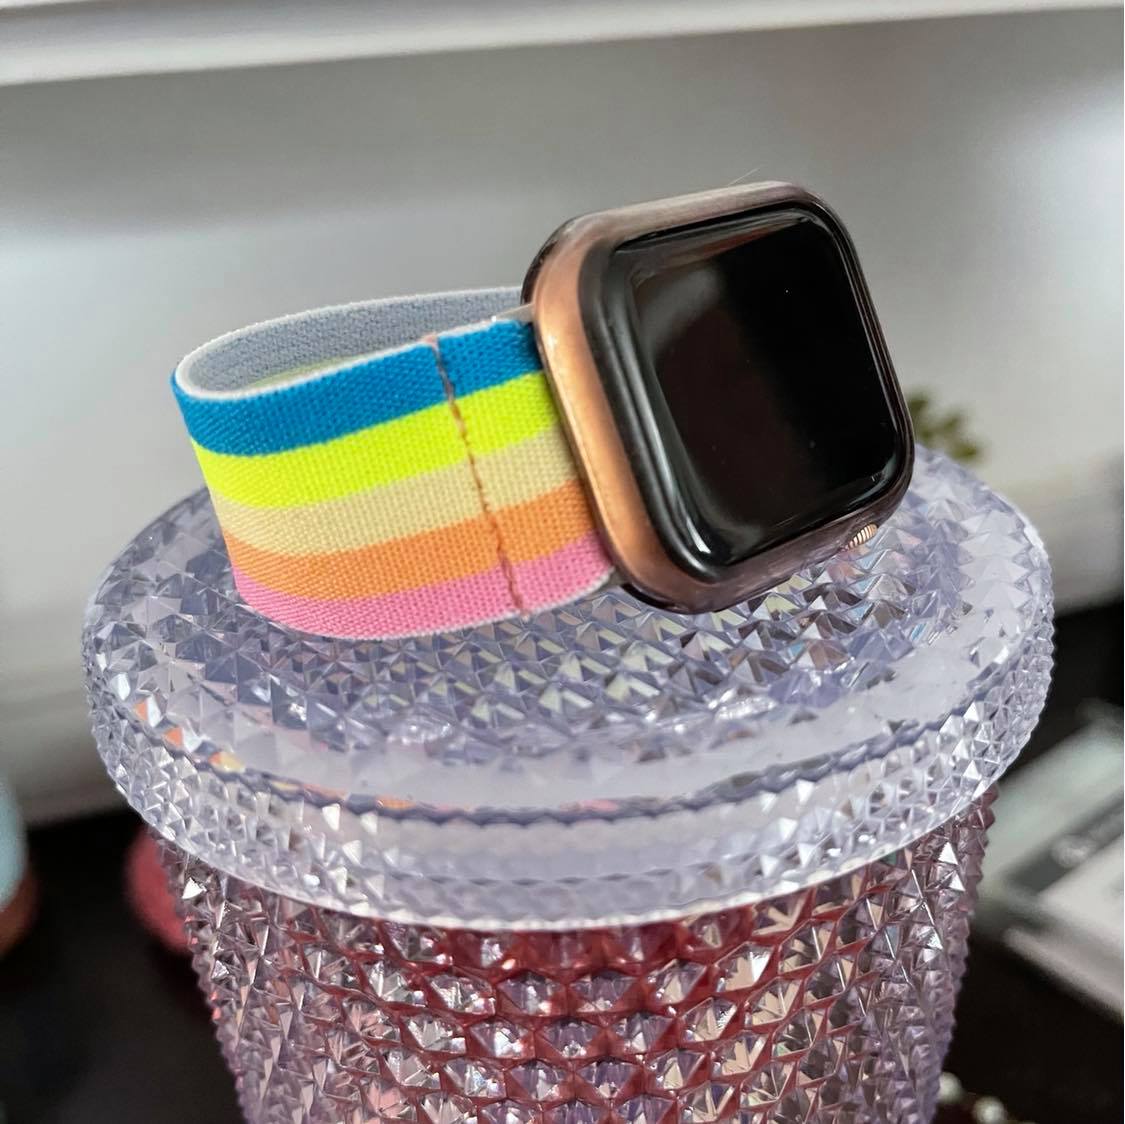 Stretchy Fun Apple Watch Bands